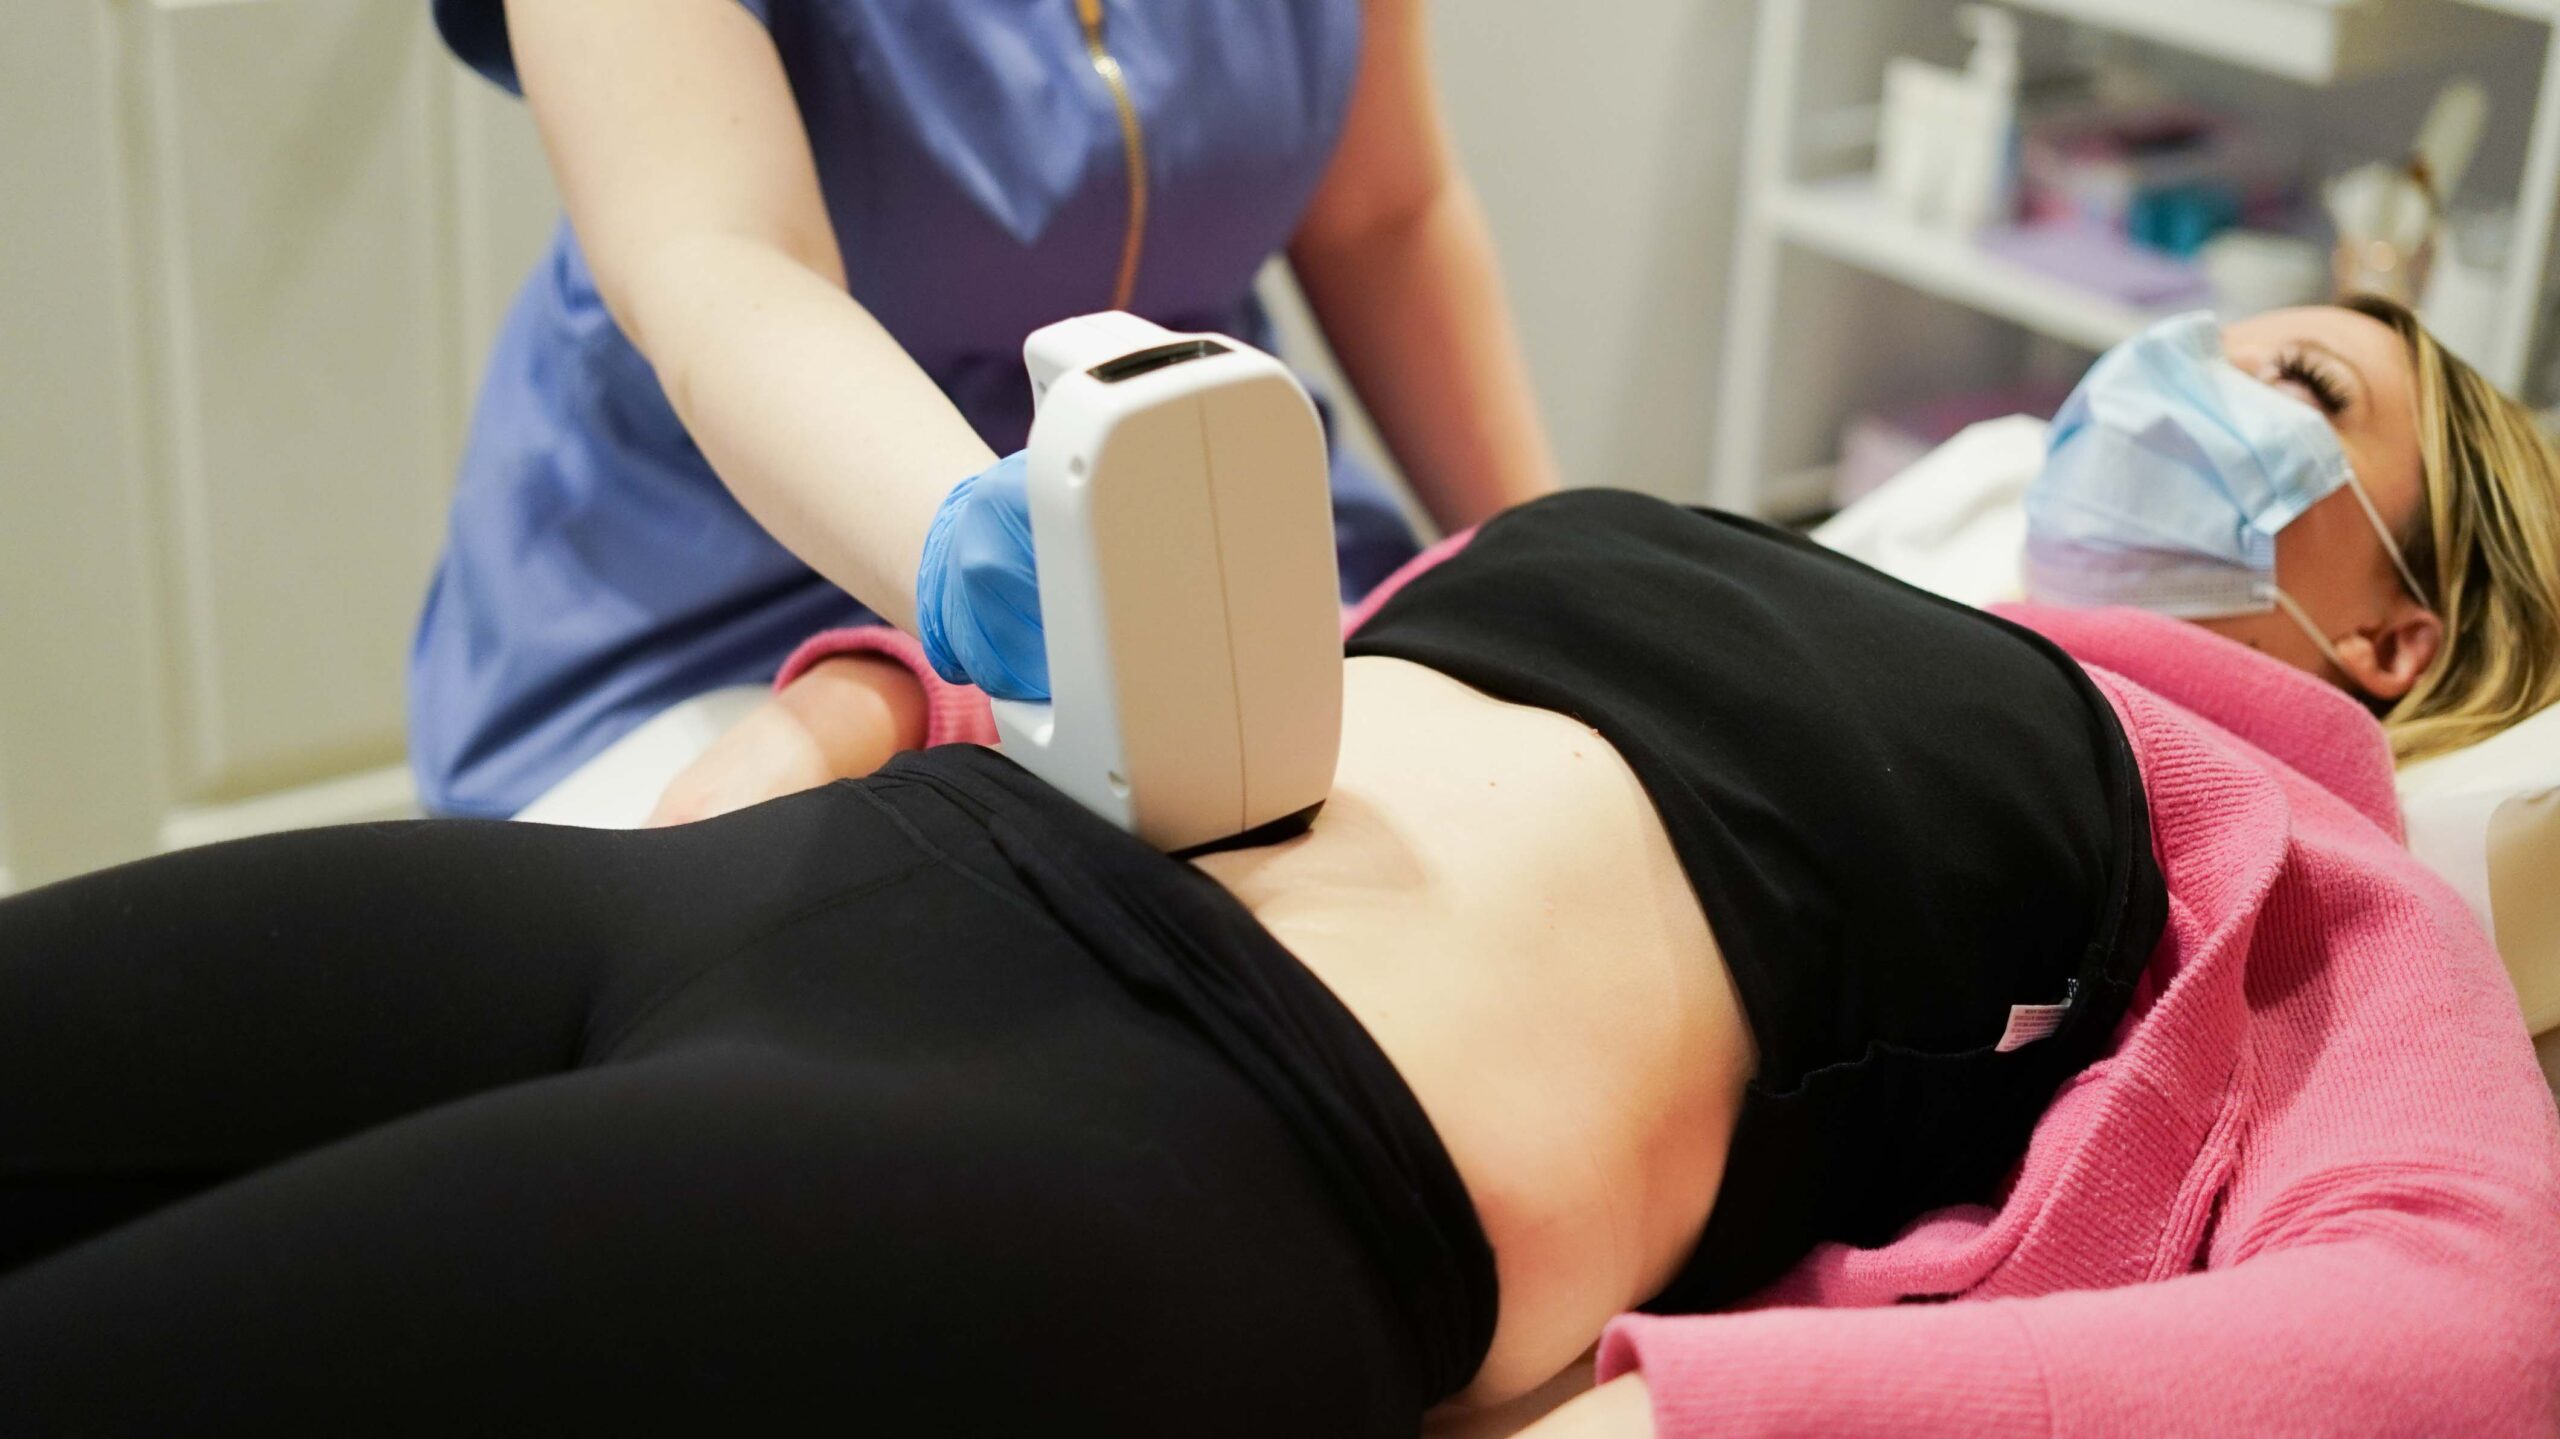 a medical procedure being performed on woman's stomach